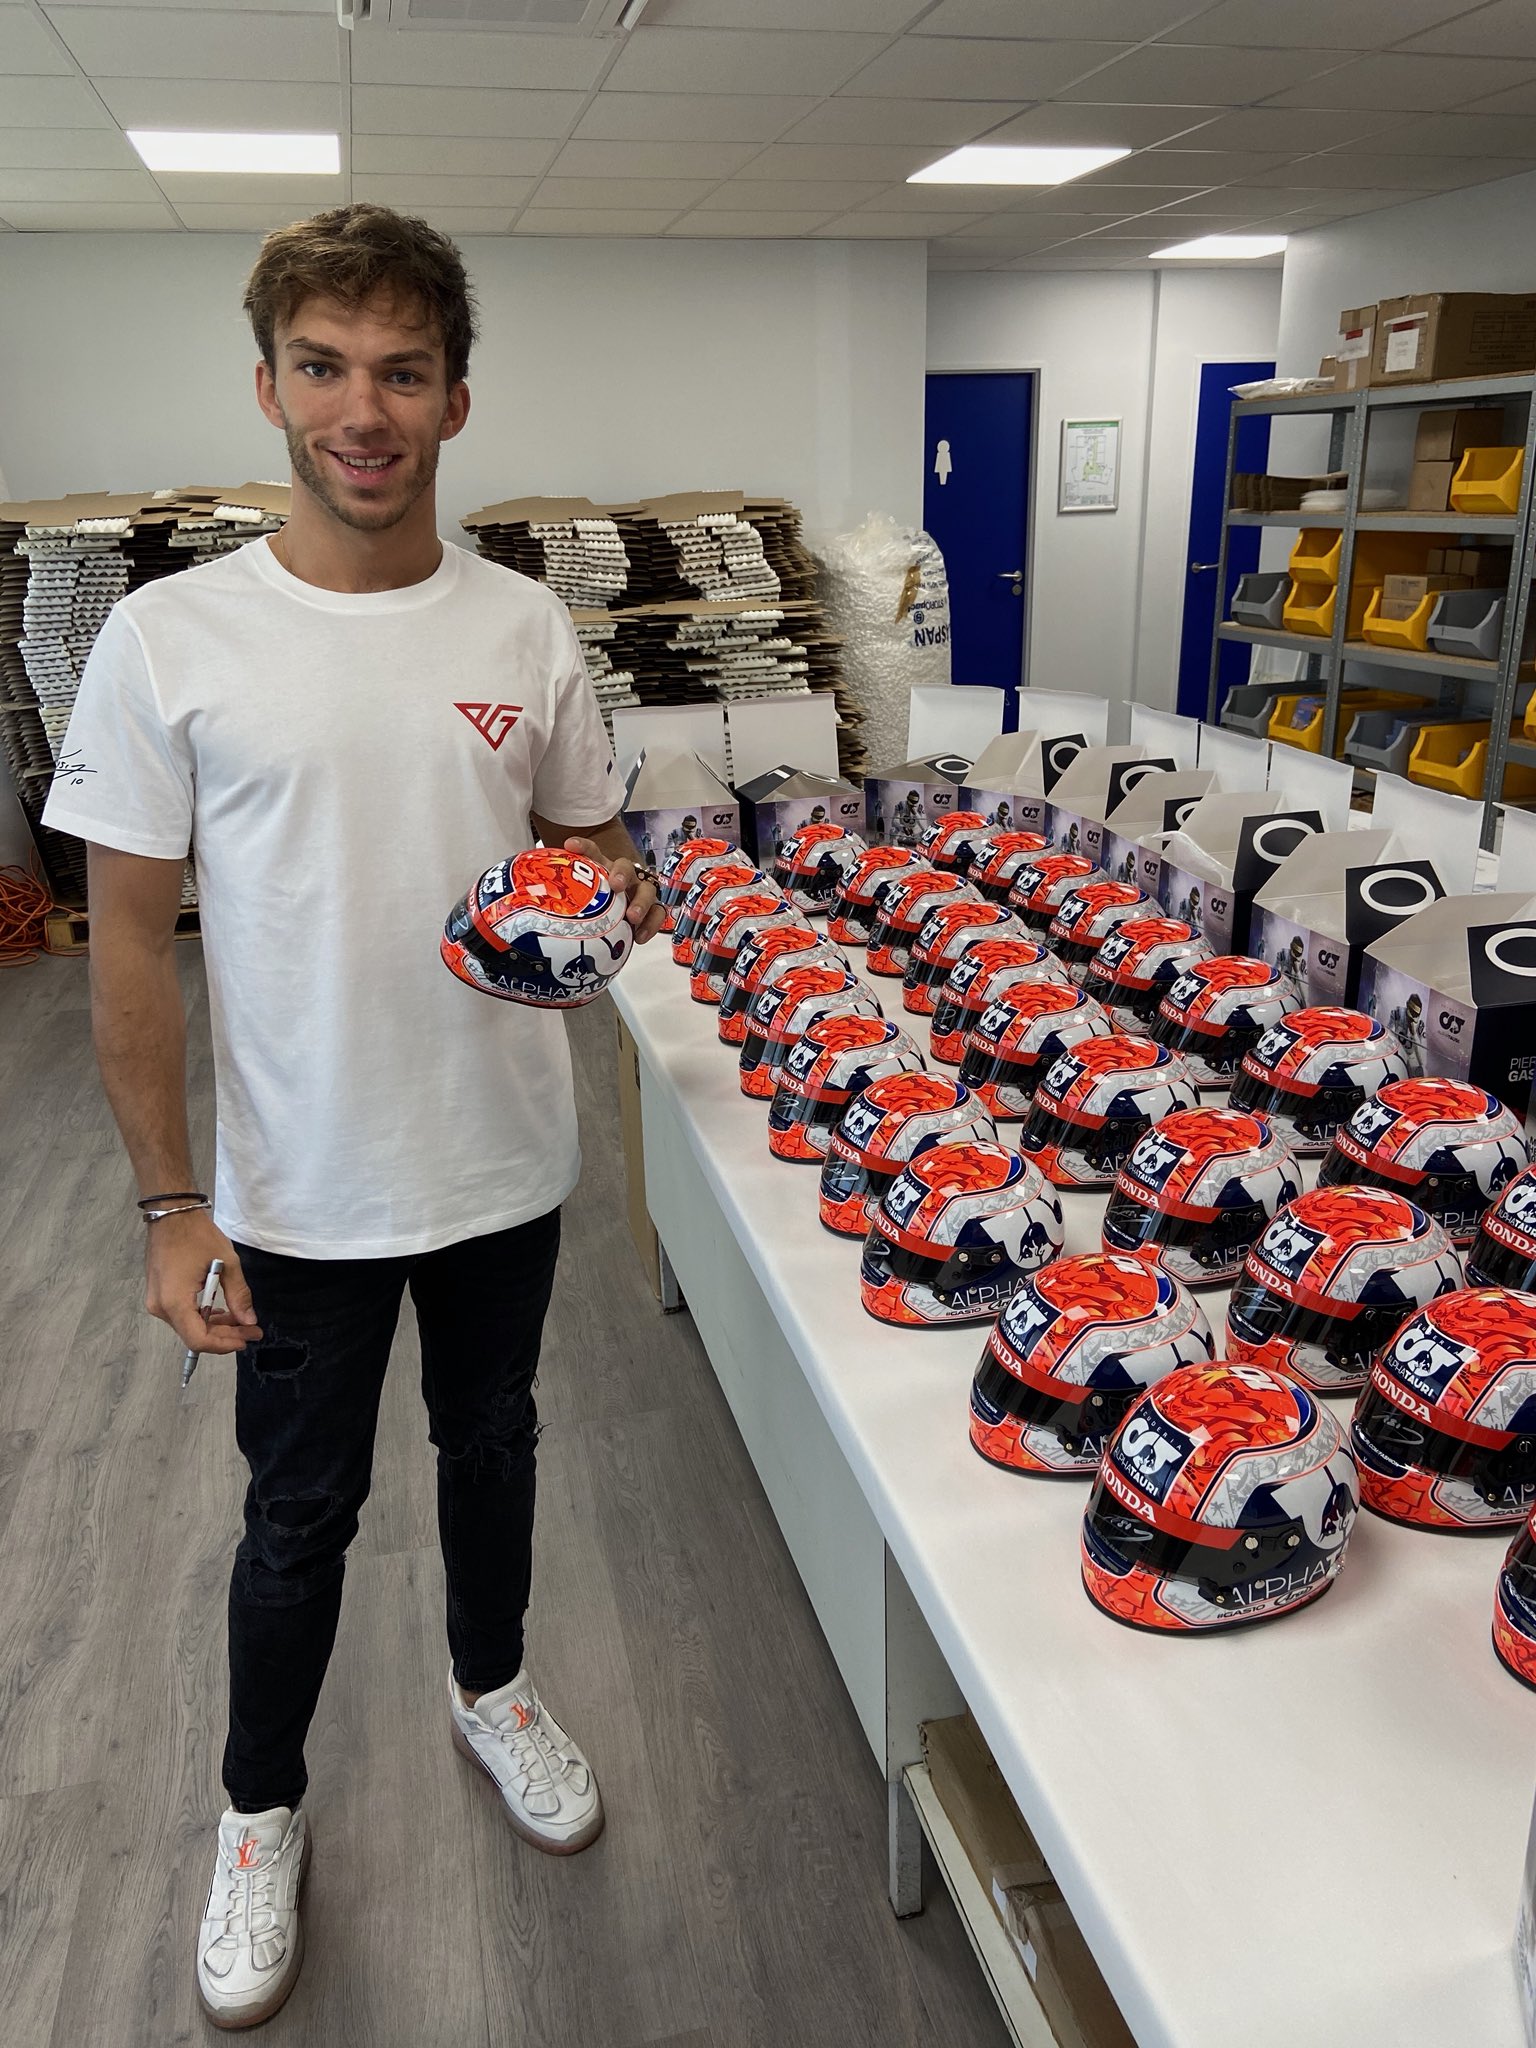 PIERRE GASLY 🇫🇷 on X: Quick visit at the shop today.☺️ Signed